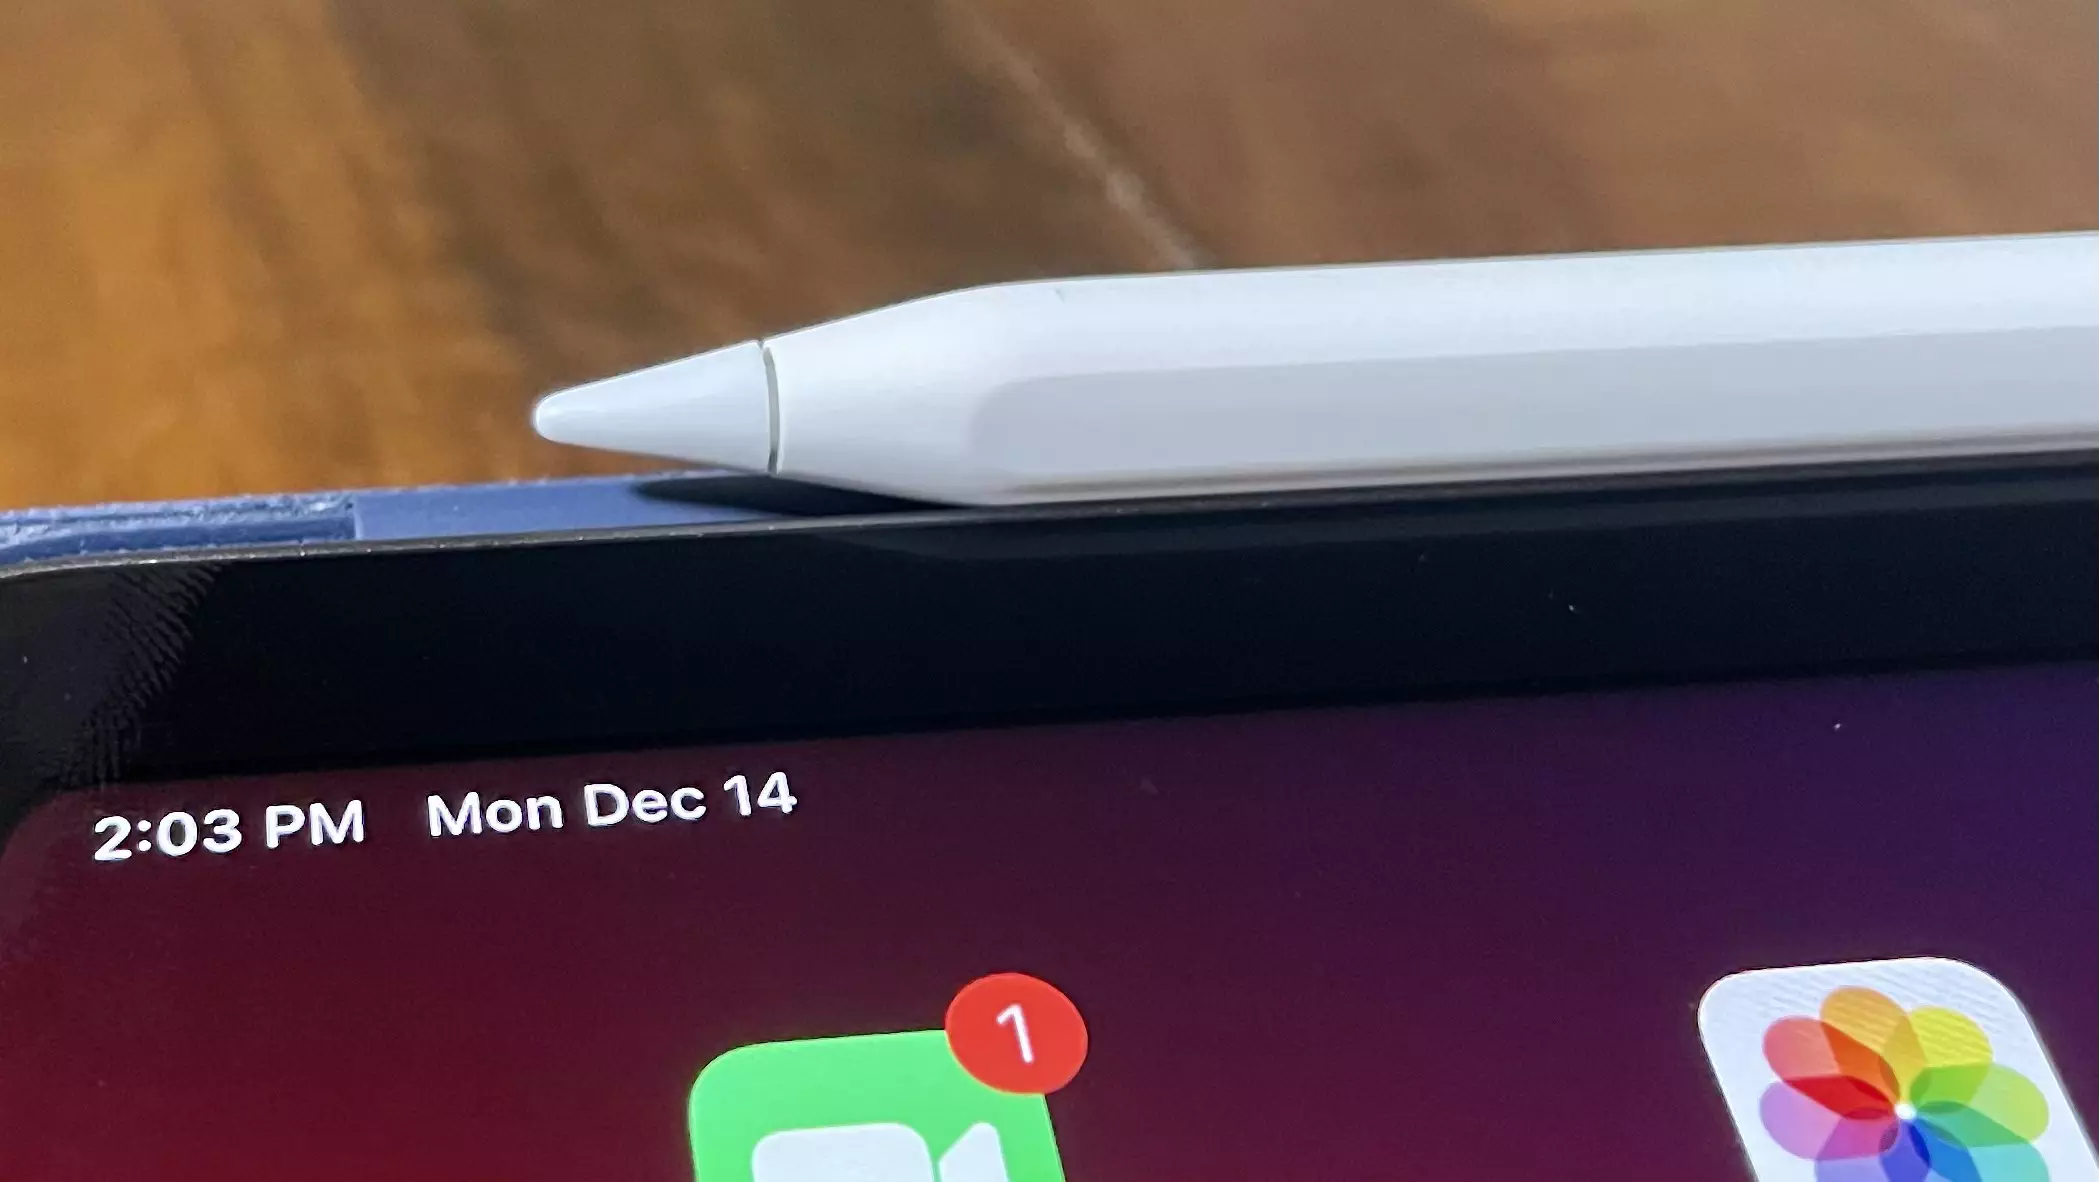 The Lifechanging Apple Pencil (2Nd Generation)